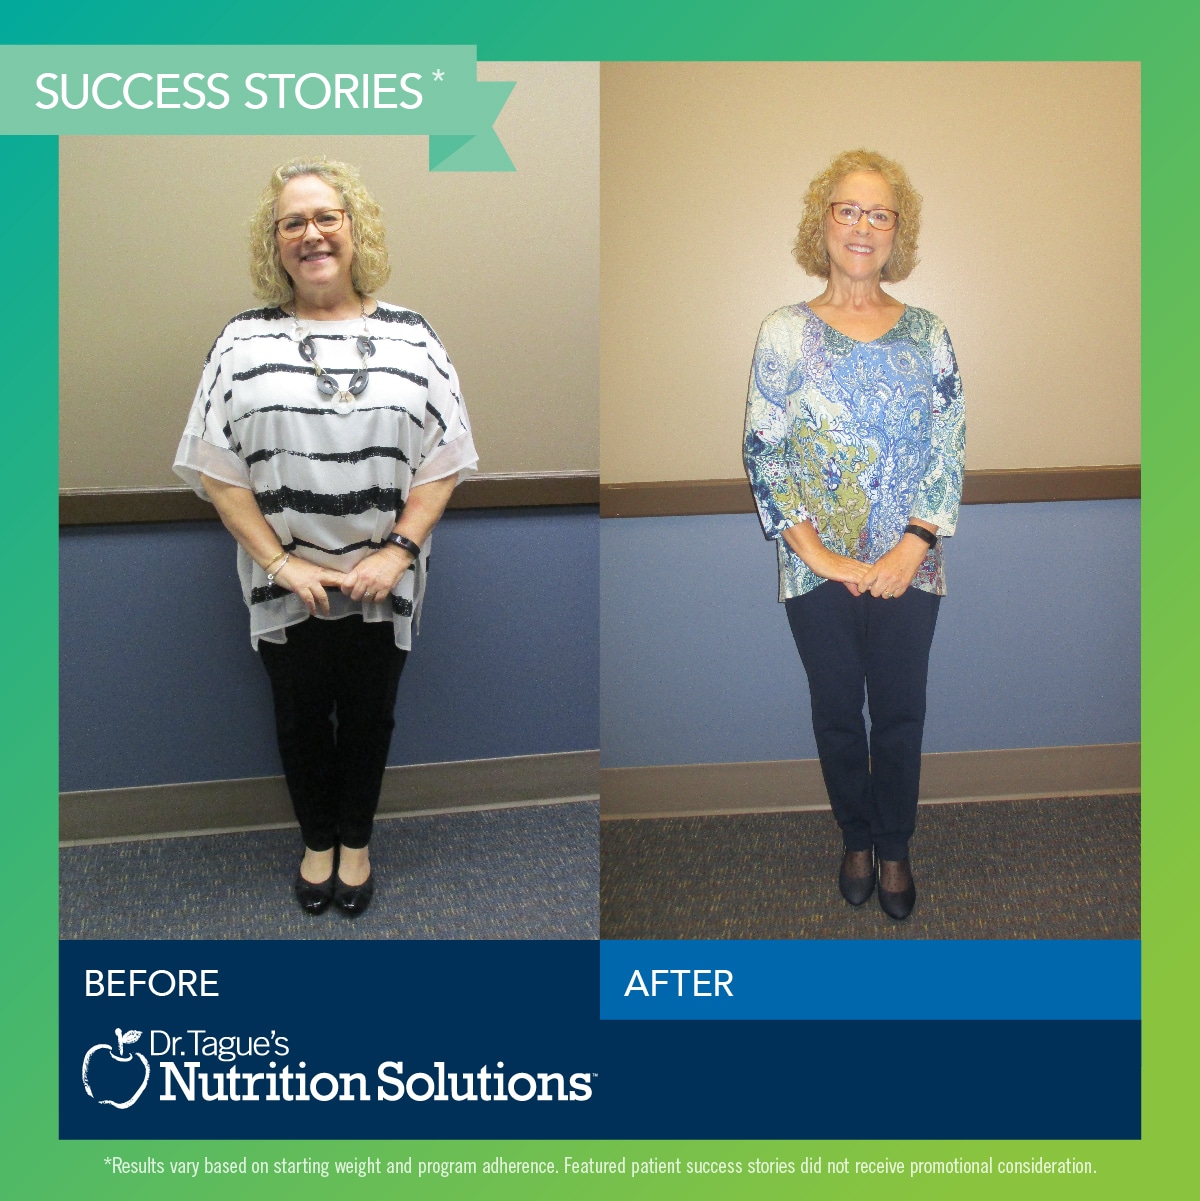 Dr. Tague Success Story - Lynn lost 63lbs in 26 weeks!